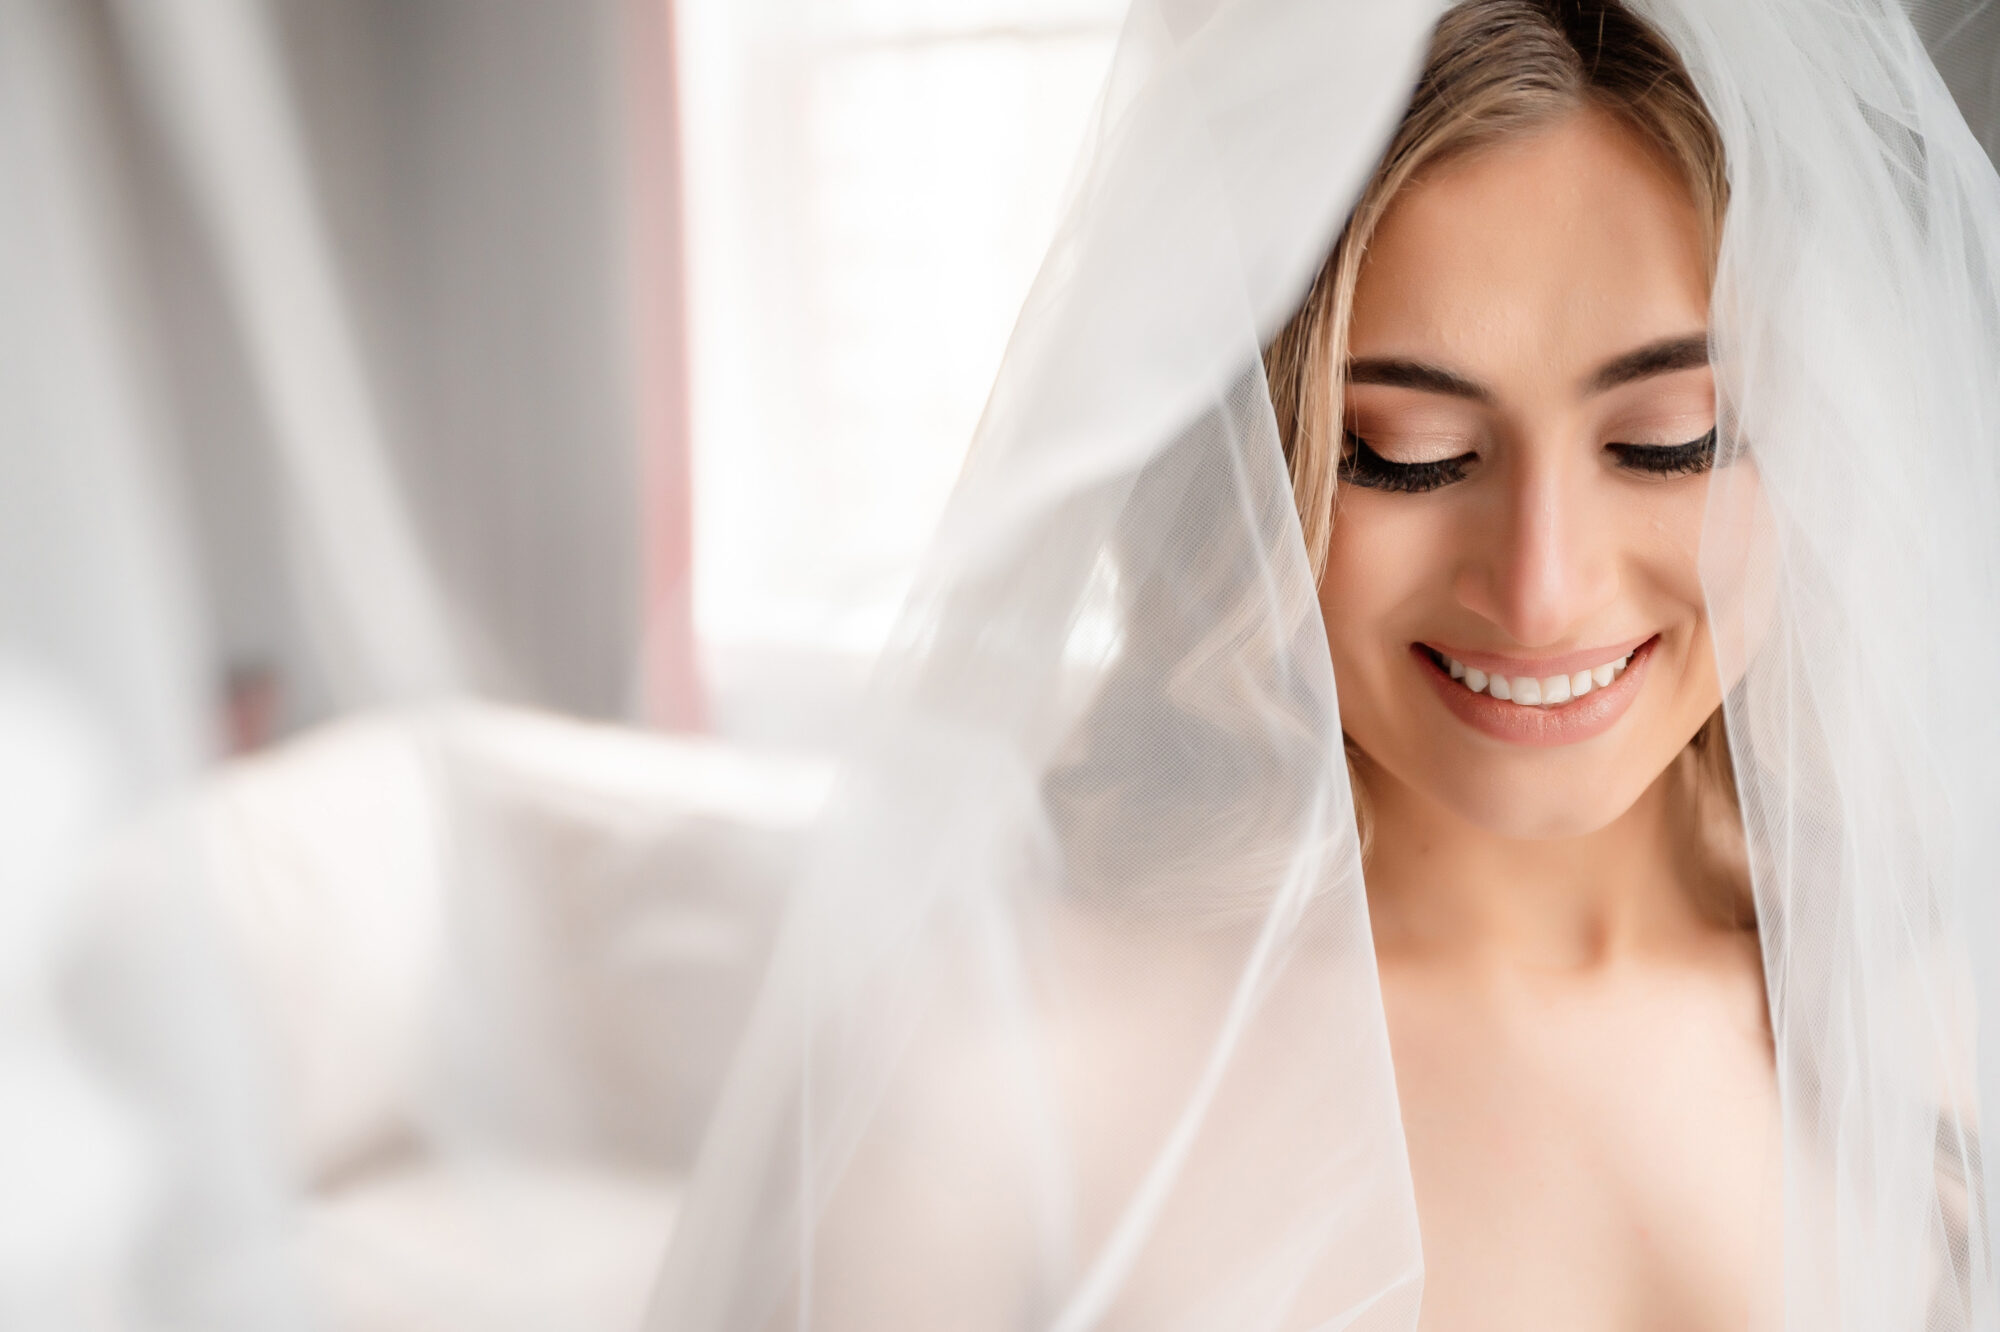 bride with wedding veil and smile • Stunning Duquesne Club Wedding Photos - An Elegant Wintery January Pittsburgh Marriage